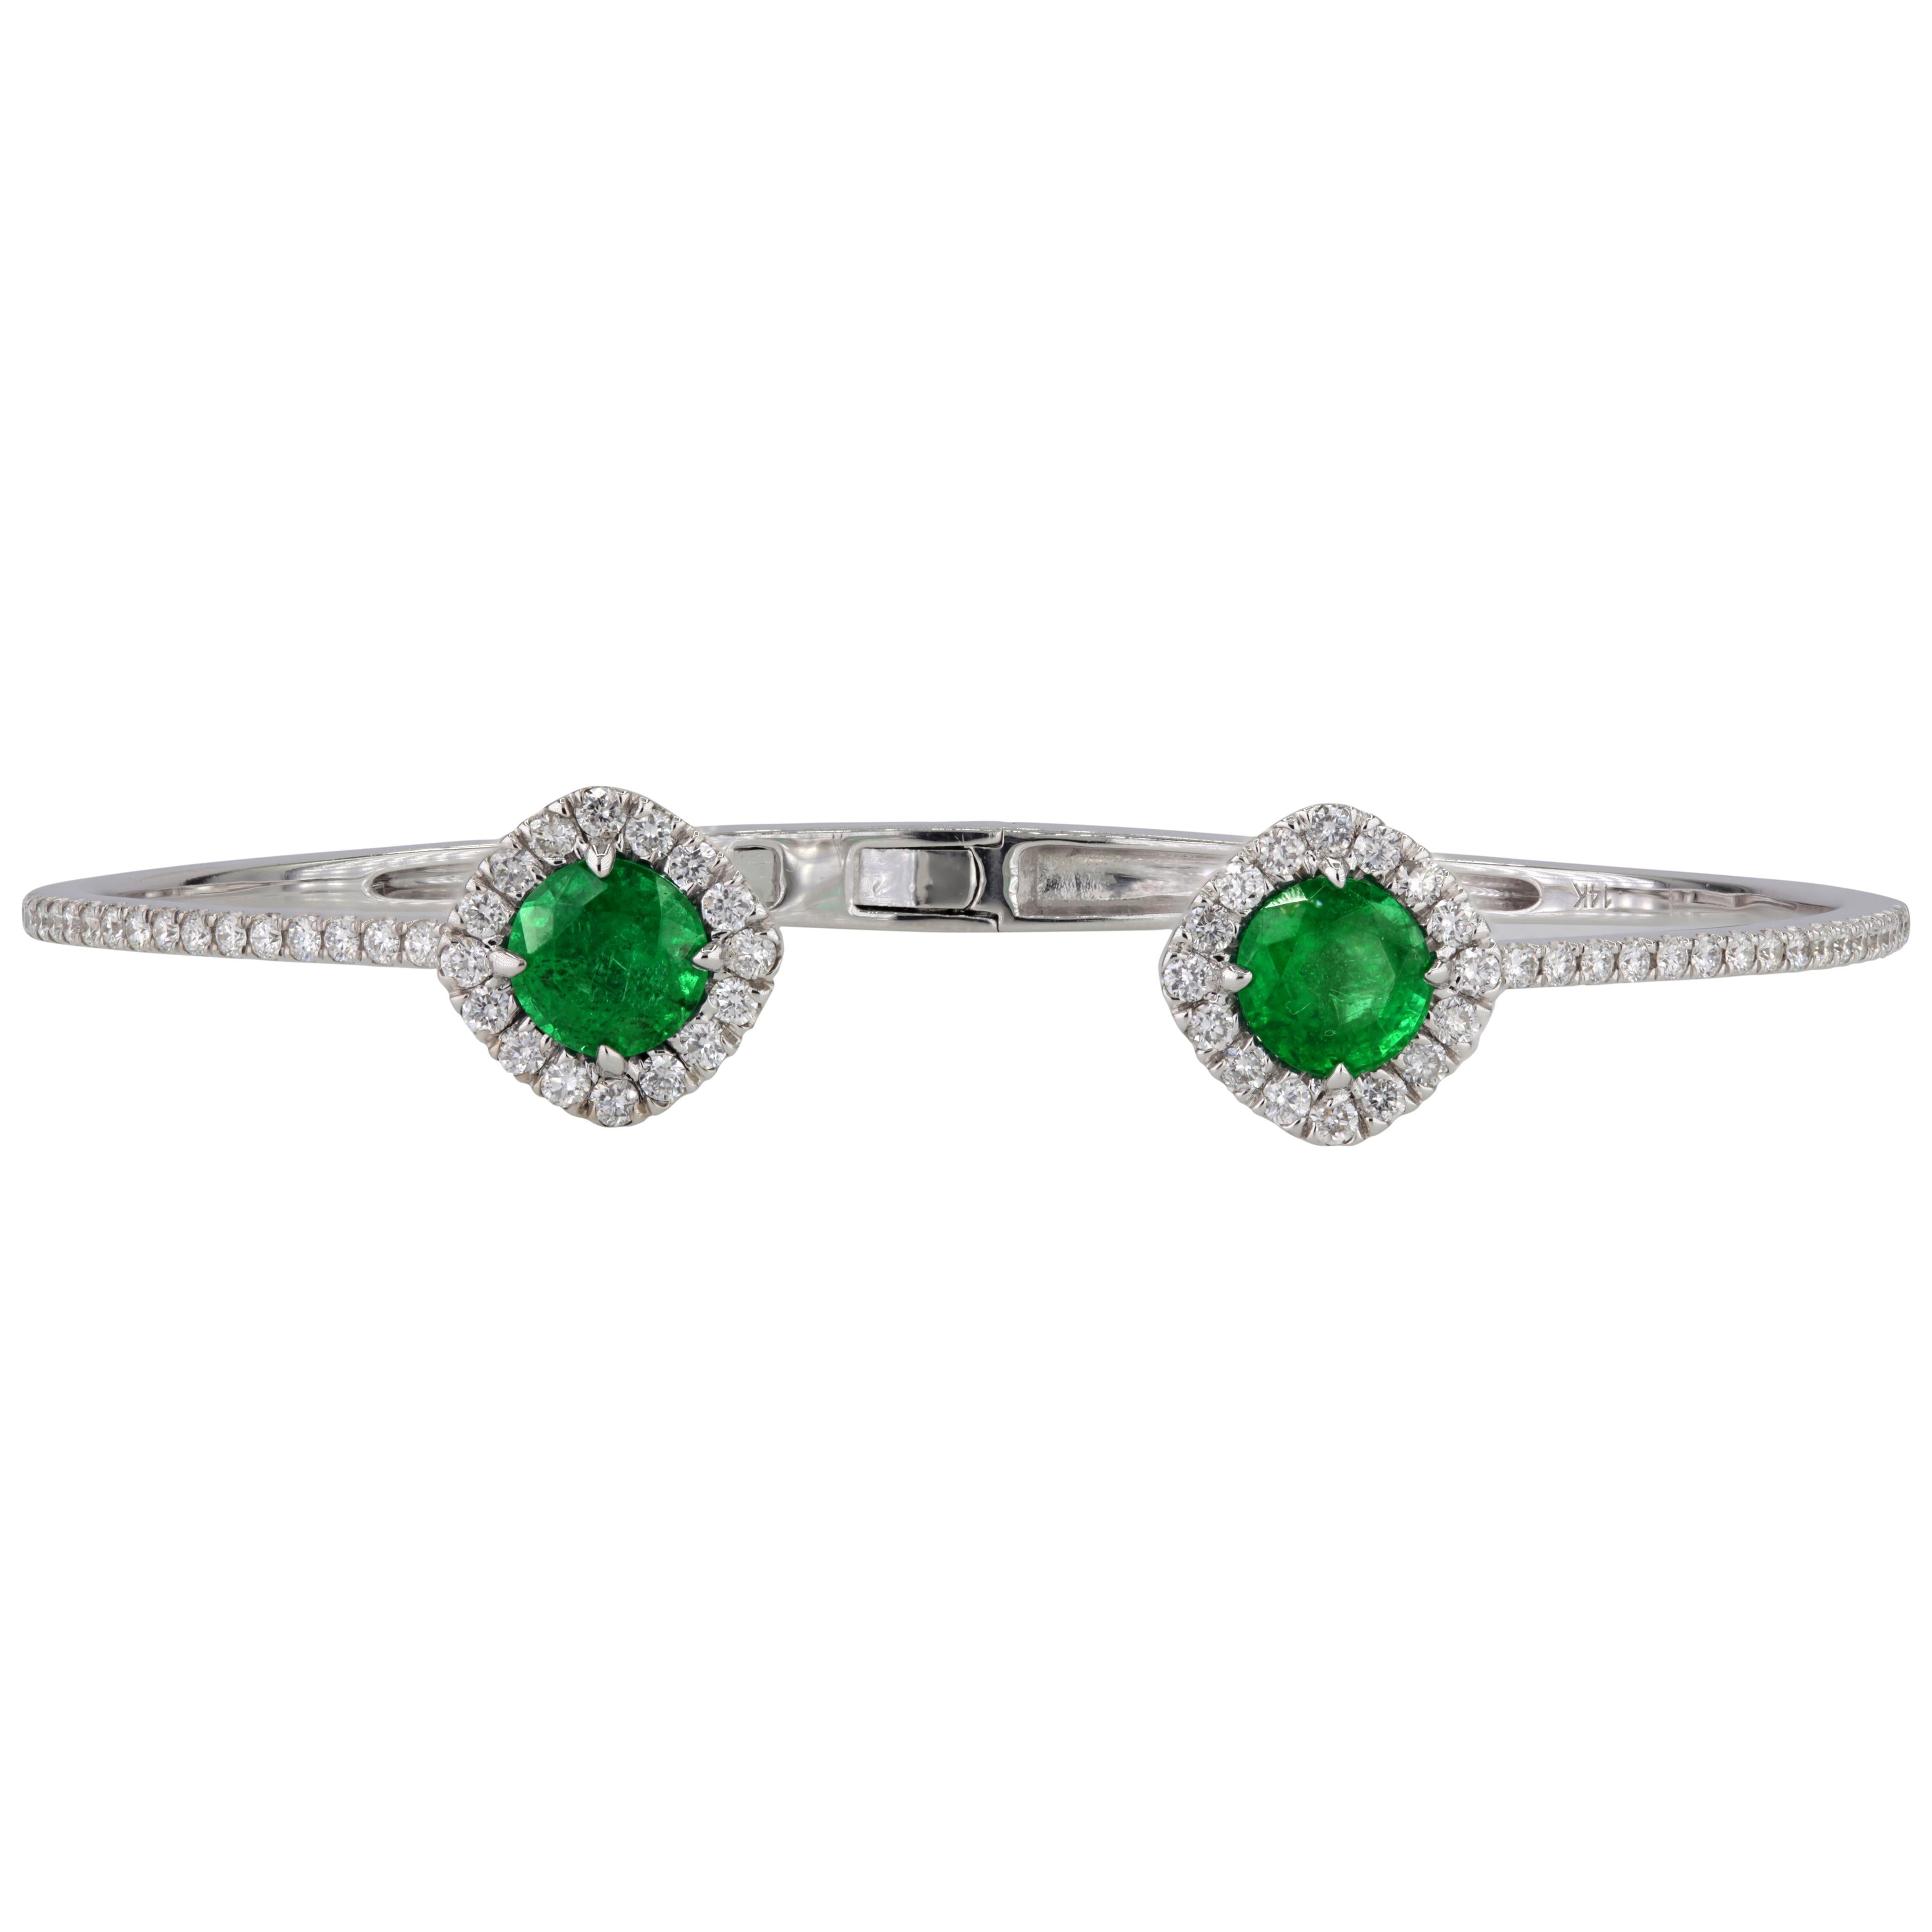 This bangle features two round-cut emeralds at its focal points, elegantly encircled by a closely set halo of round white diamonds that extends to the midpoint of the bangle. The arrangement of the halo cleverly creates the illusion of a cushion-cut